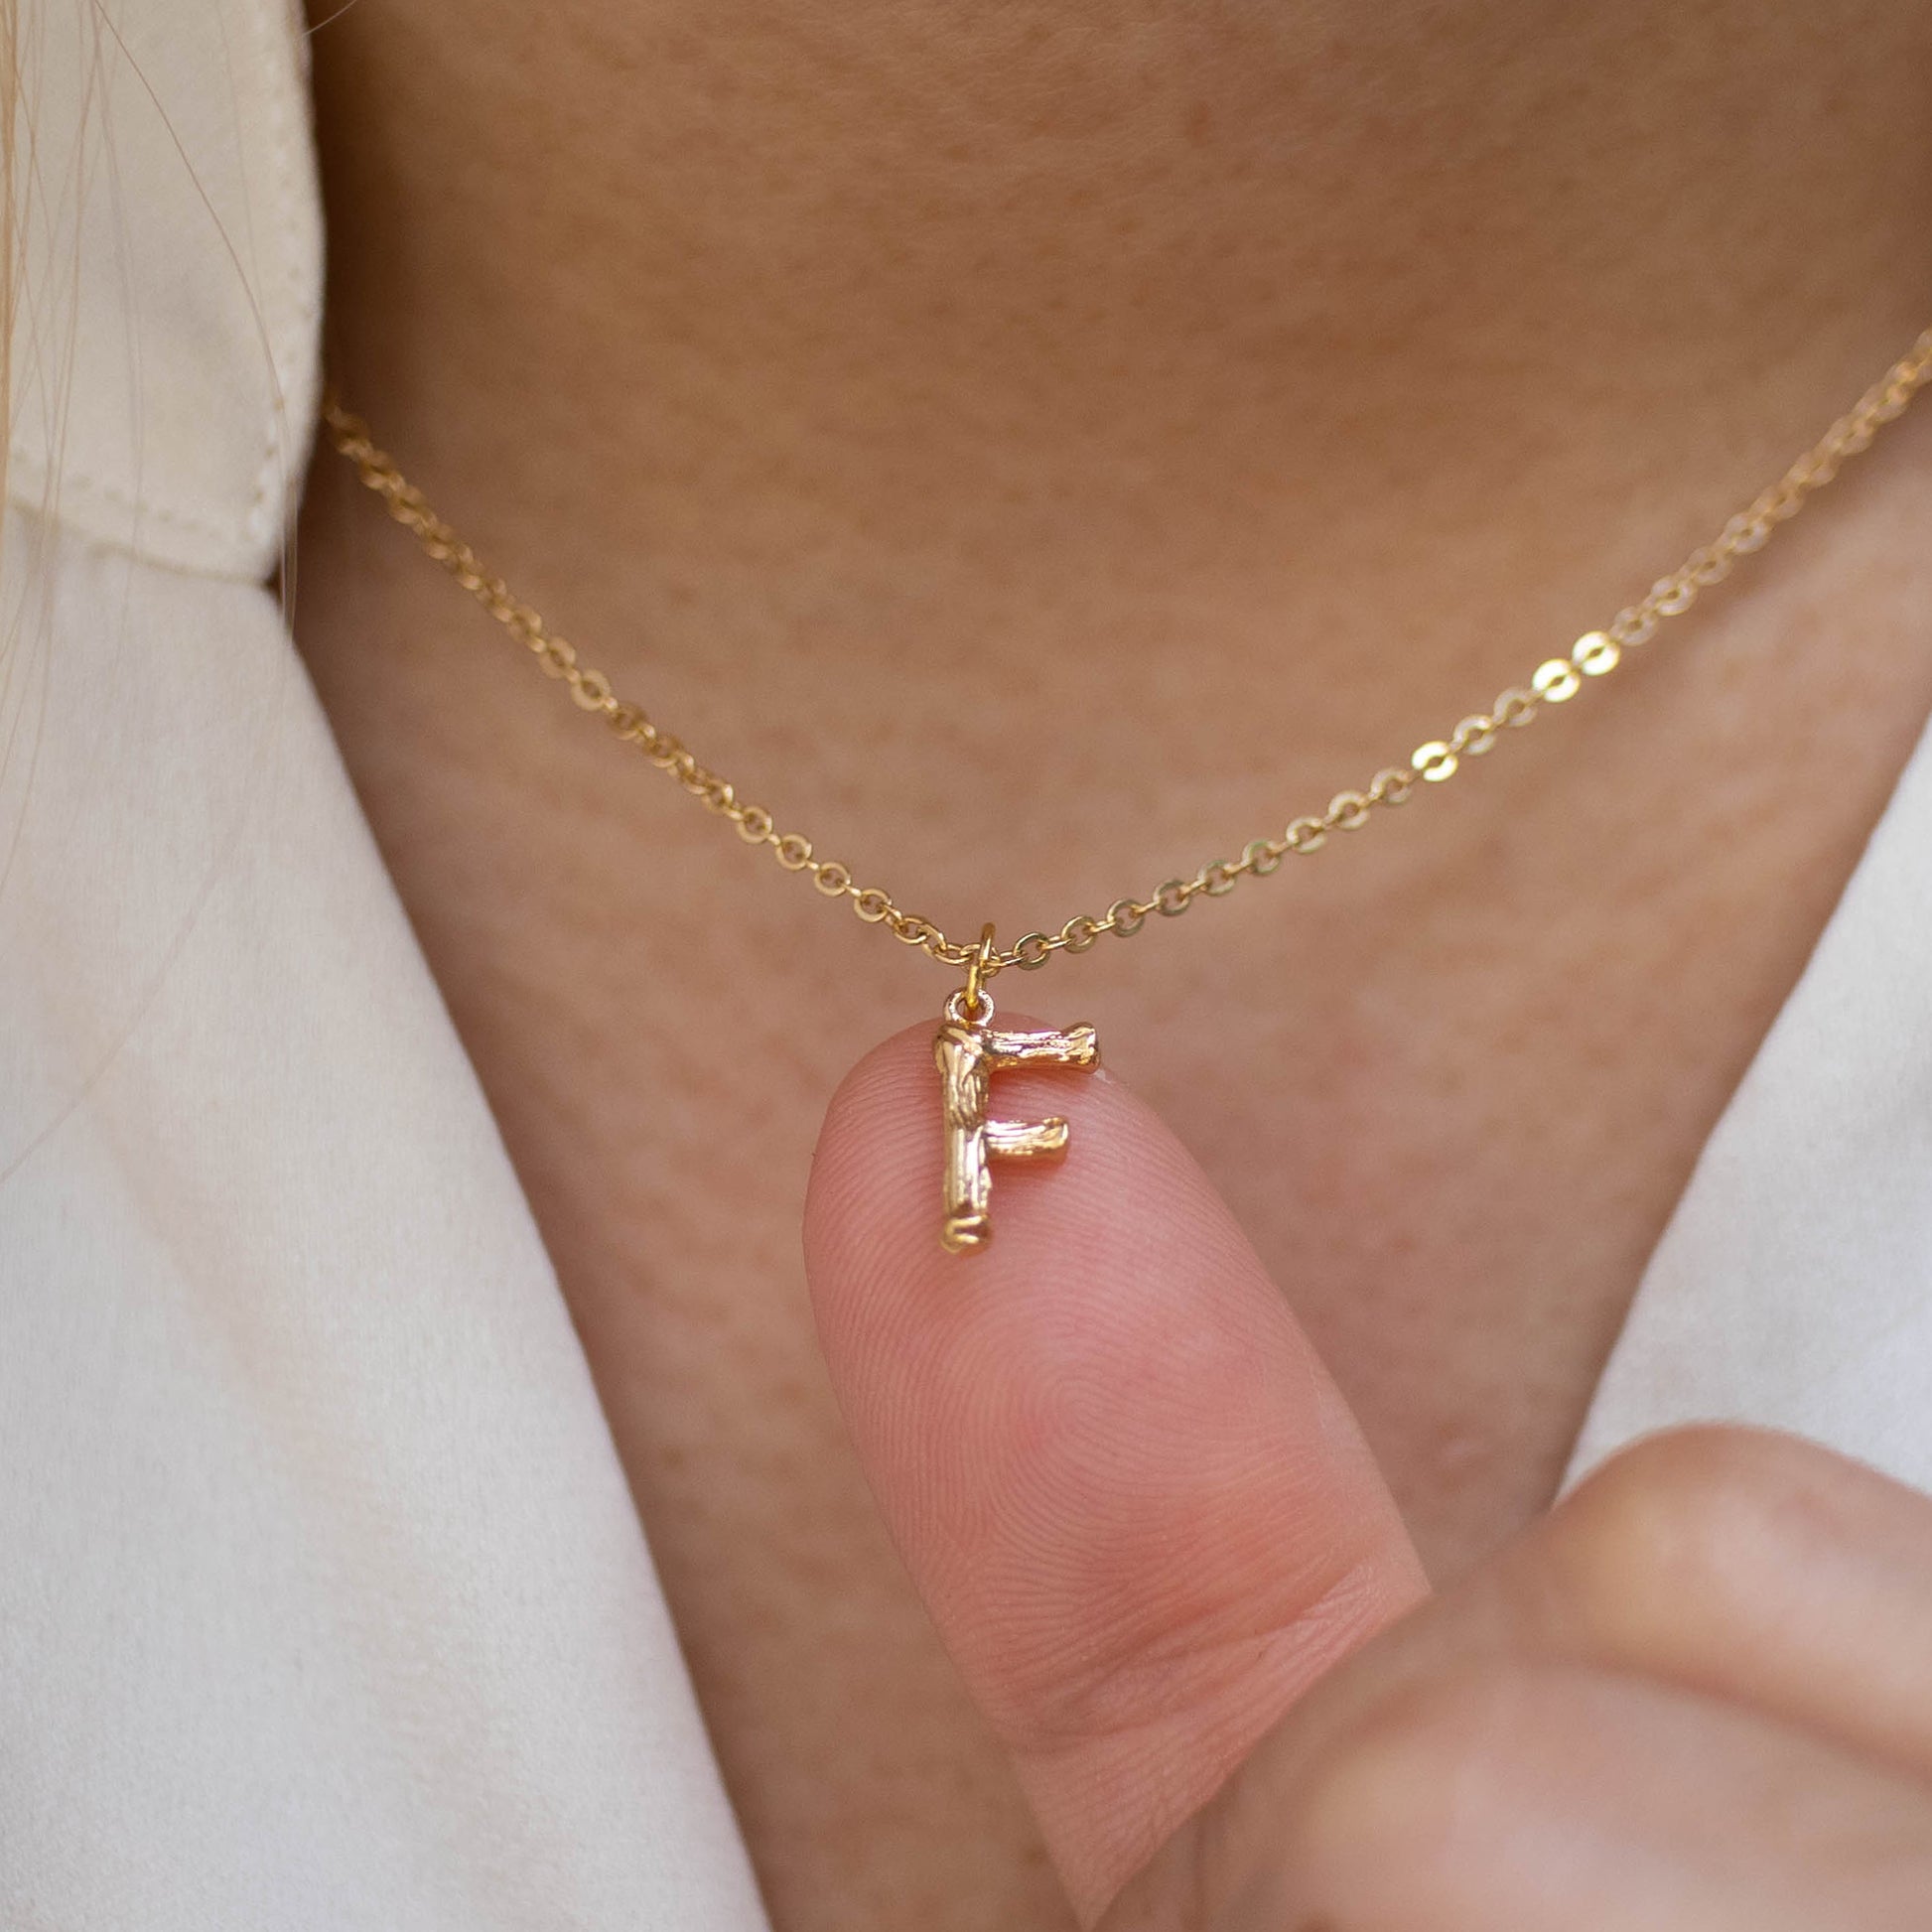 This photo features a thin chain necklace made of 14K gold-plated sterling silver, paired with a golden Letter pendant.